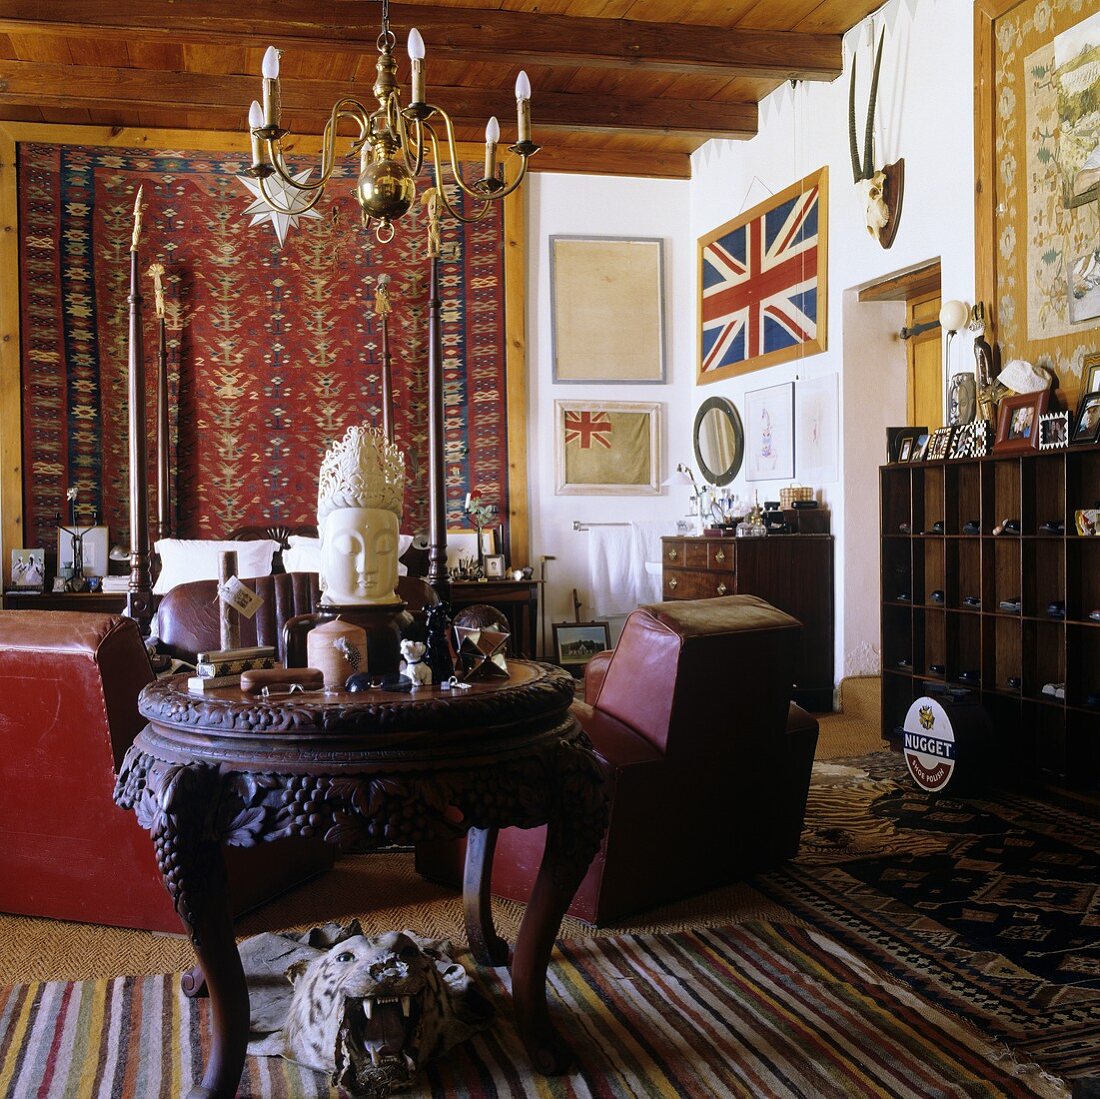 A living room in a South African country house with a dark antique table and a chandelier hanging from the wooden ceiling